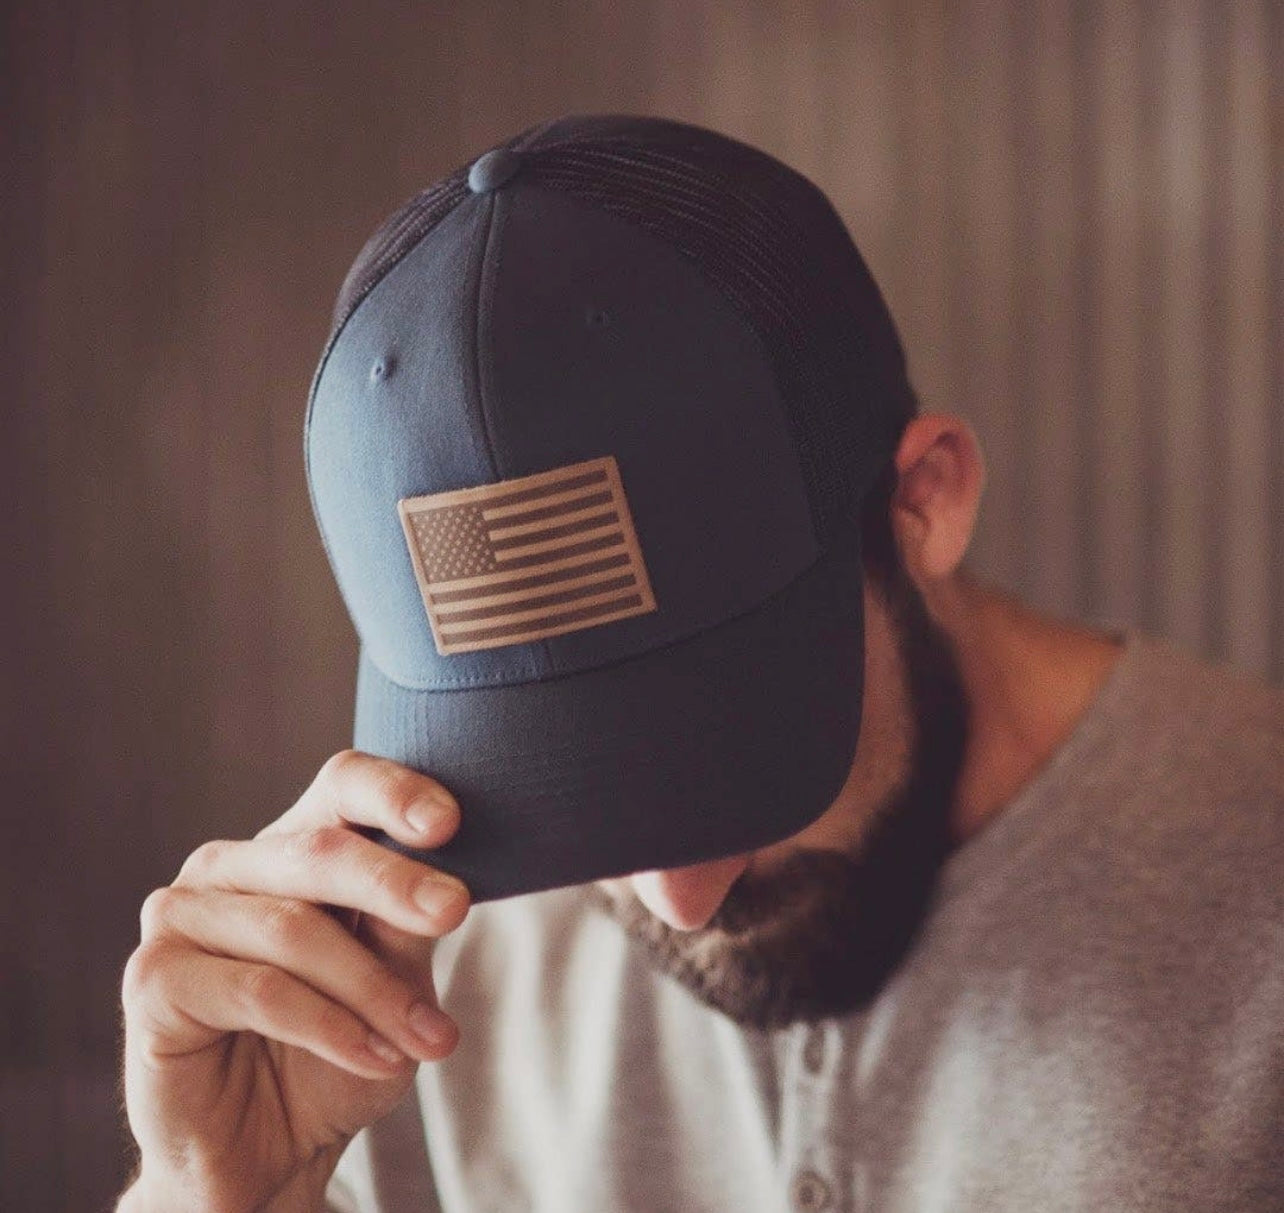 Hat with Leather USA Flag Patch